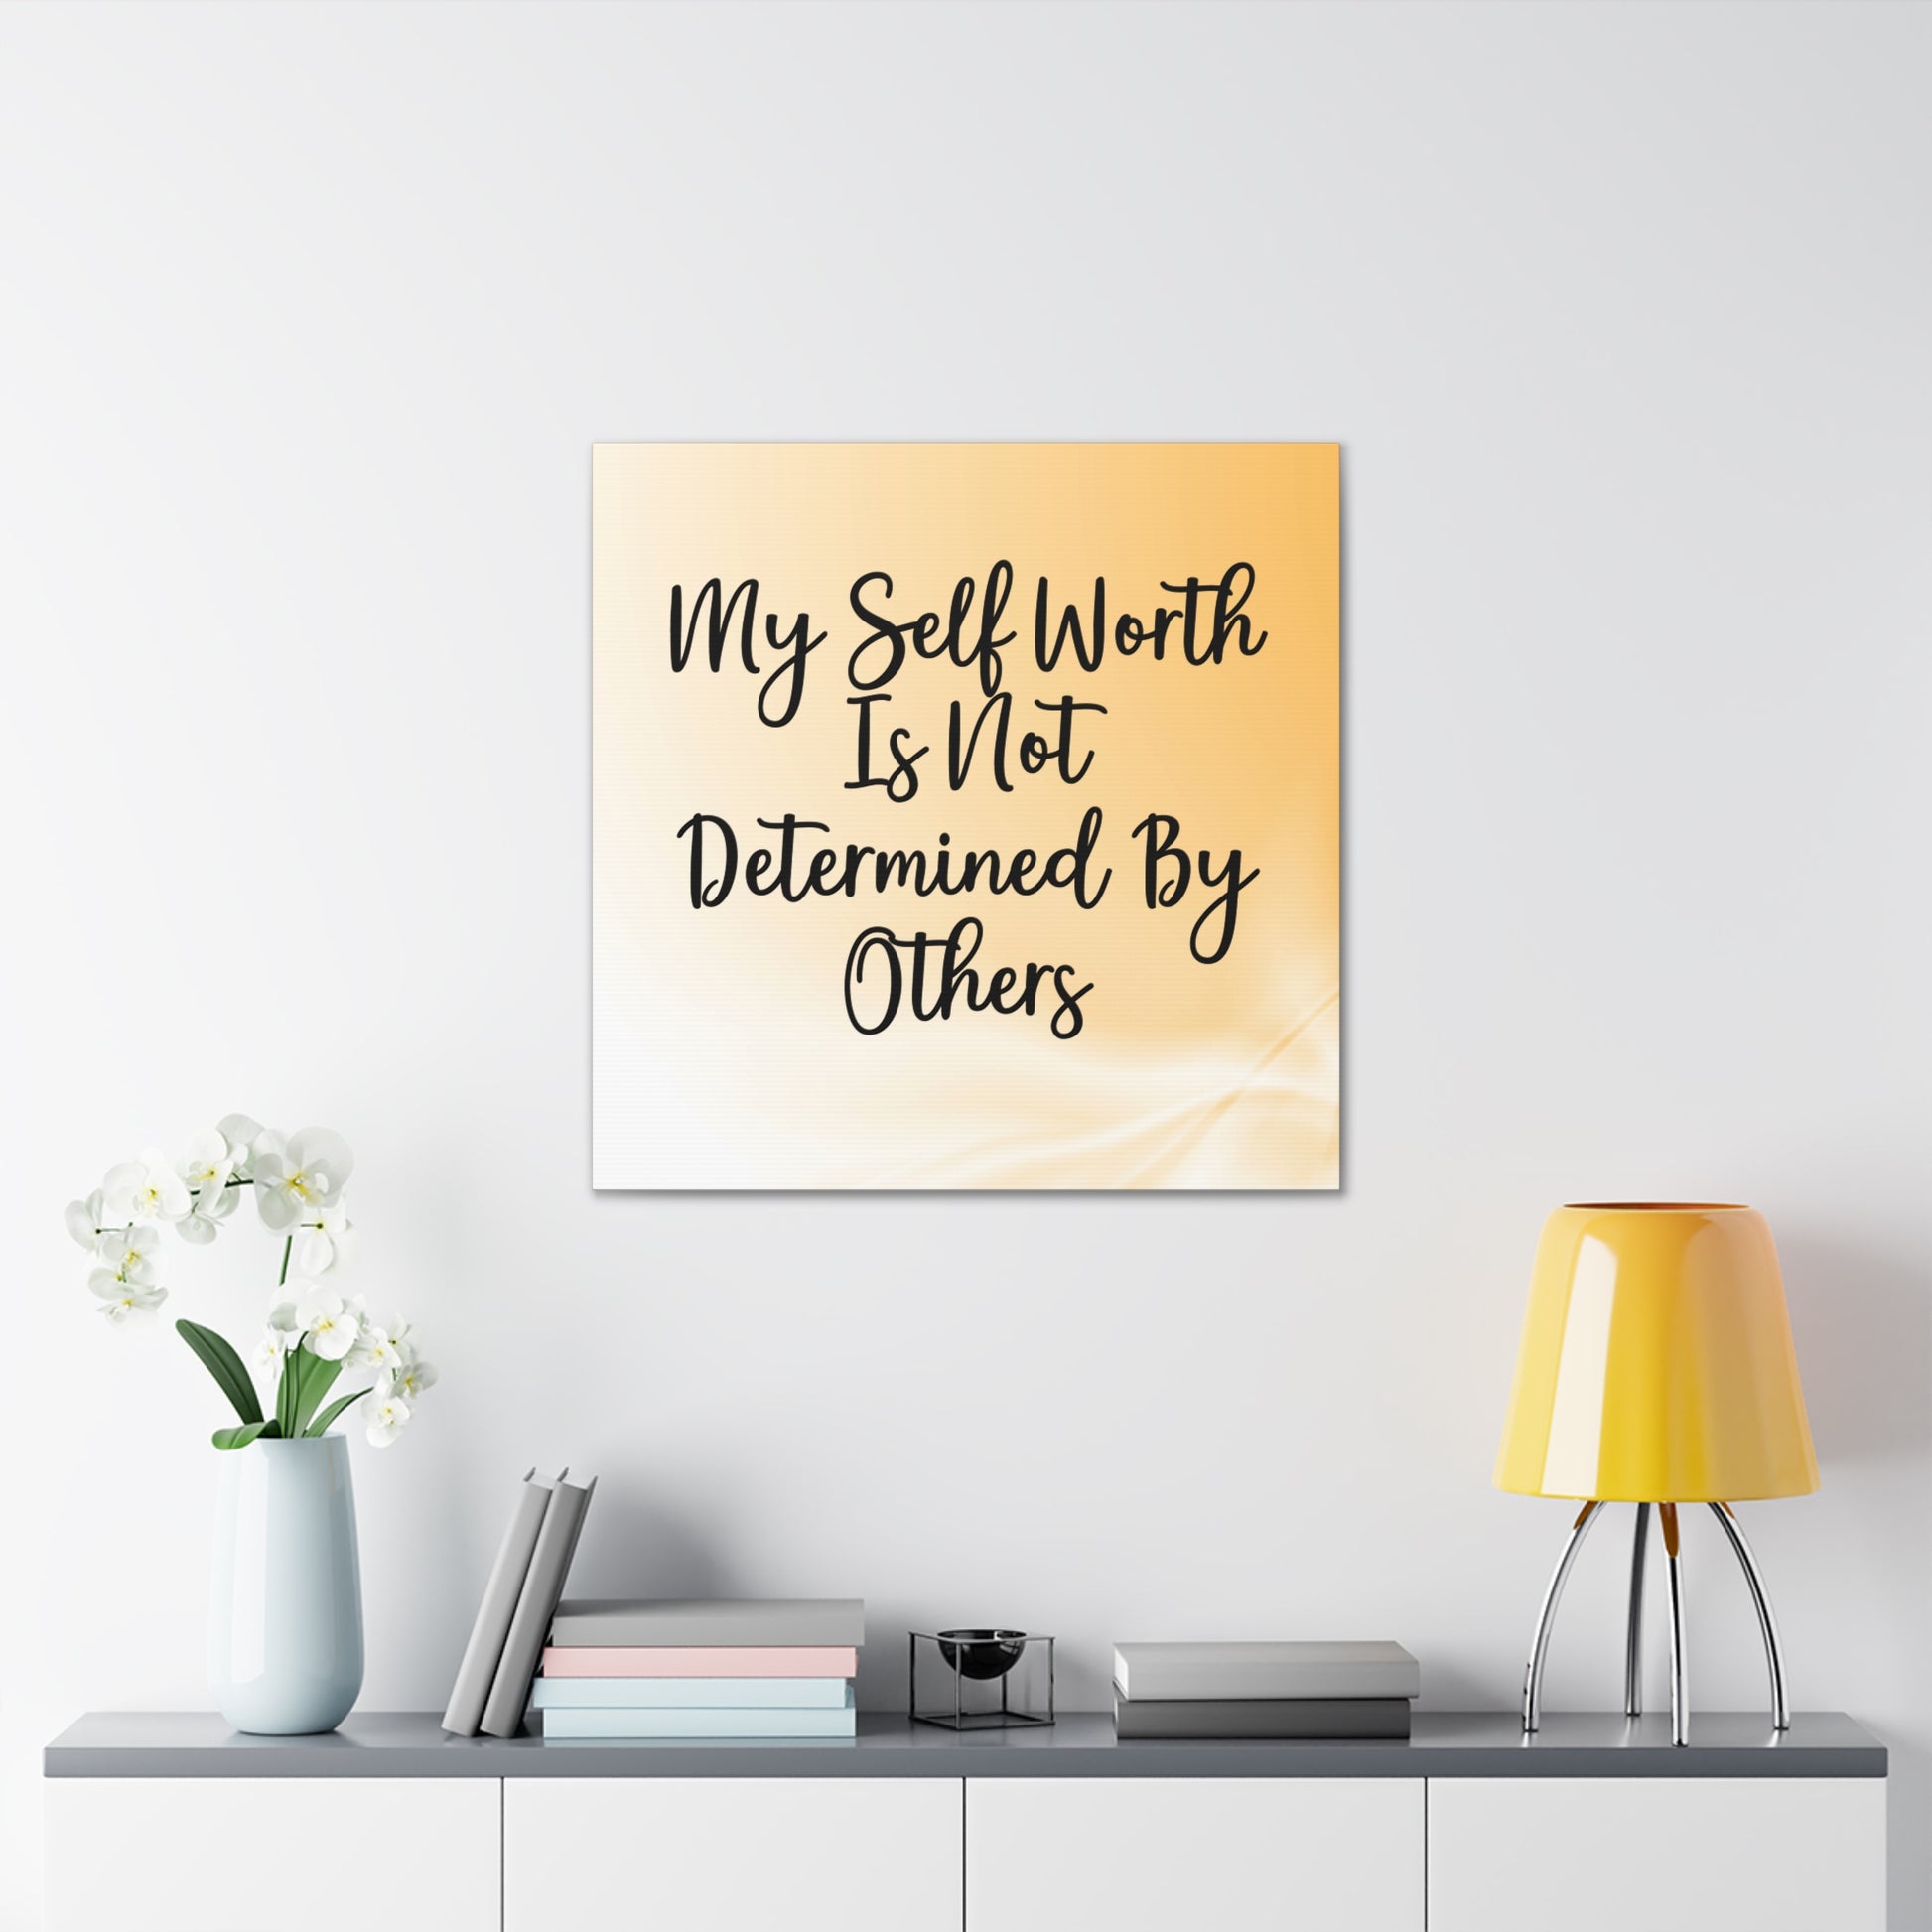 "My Self Worth Is Not Determined By Others" Wall Art - Weave Got Gifts - Unique Gifts You Won’t Find Anywhere Else!